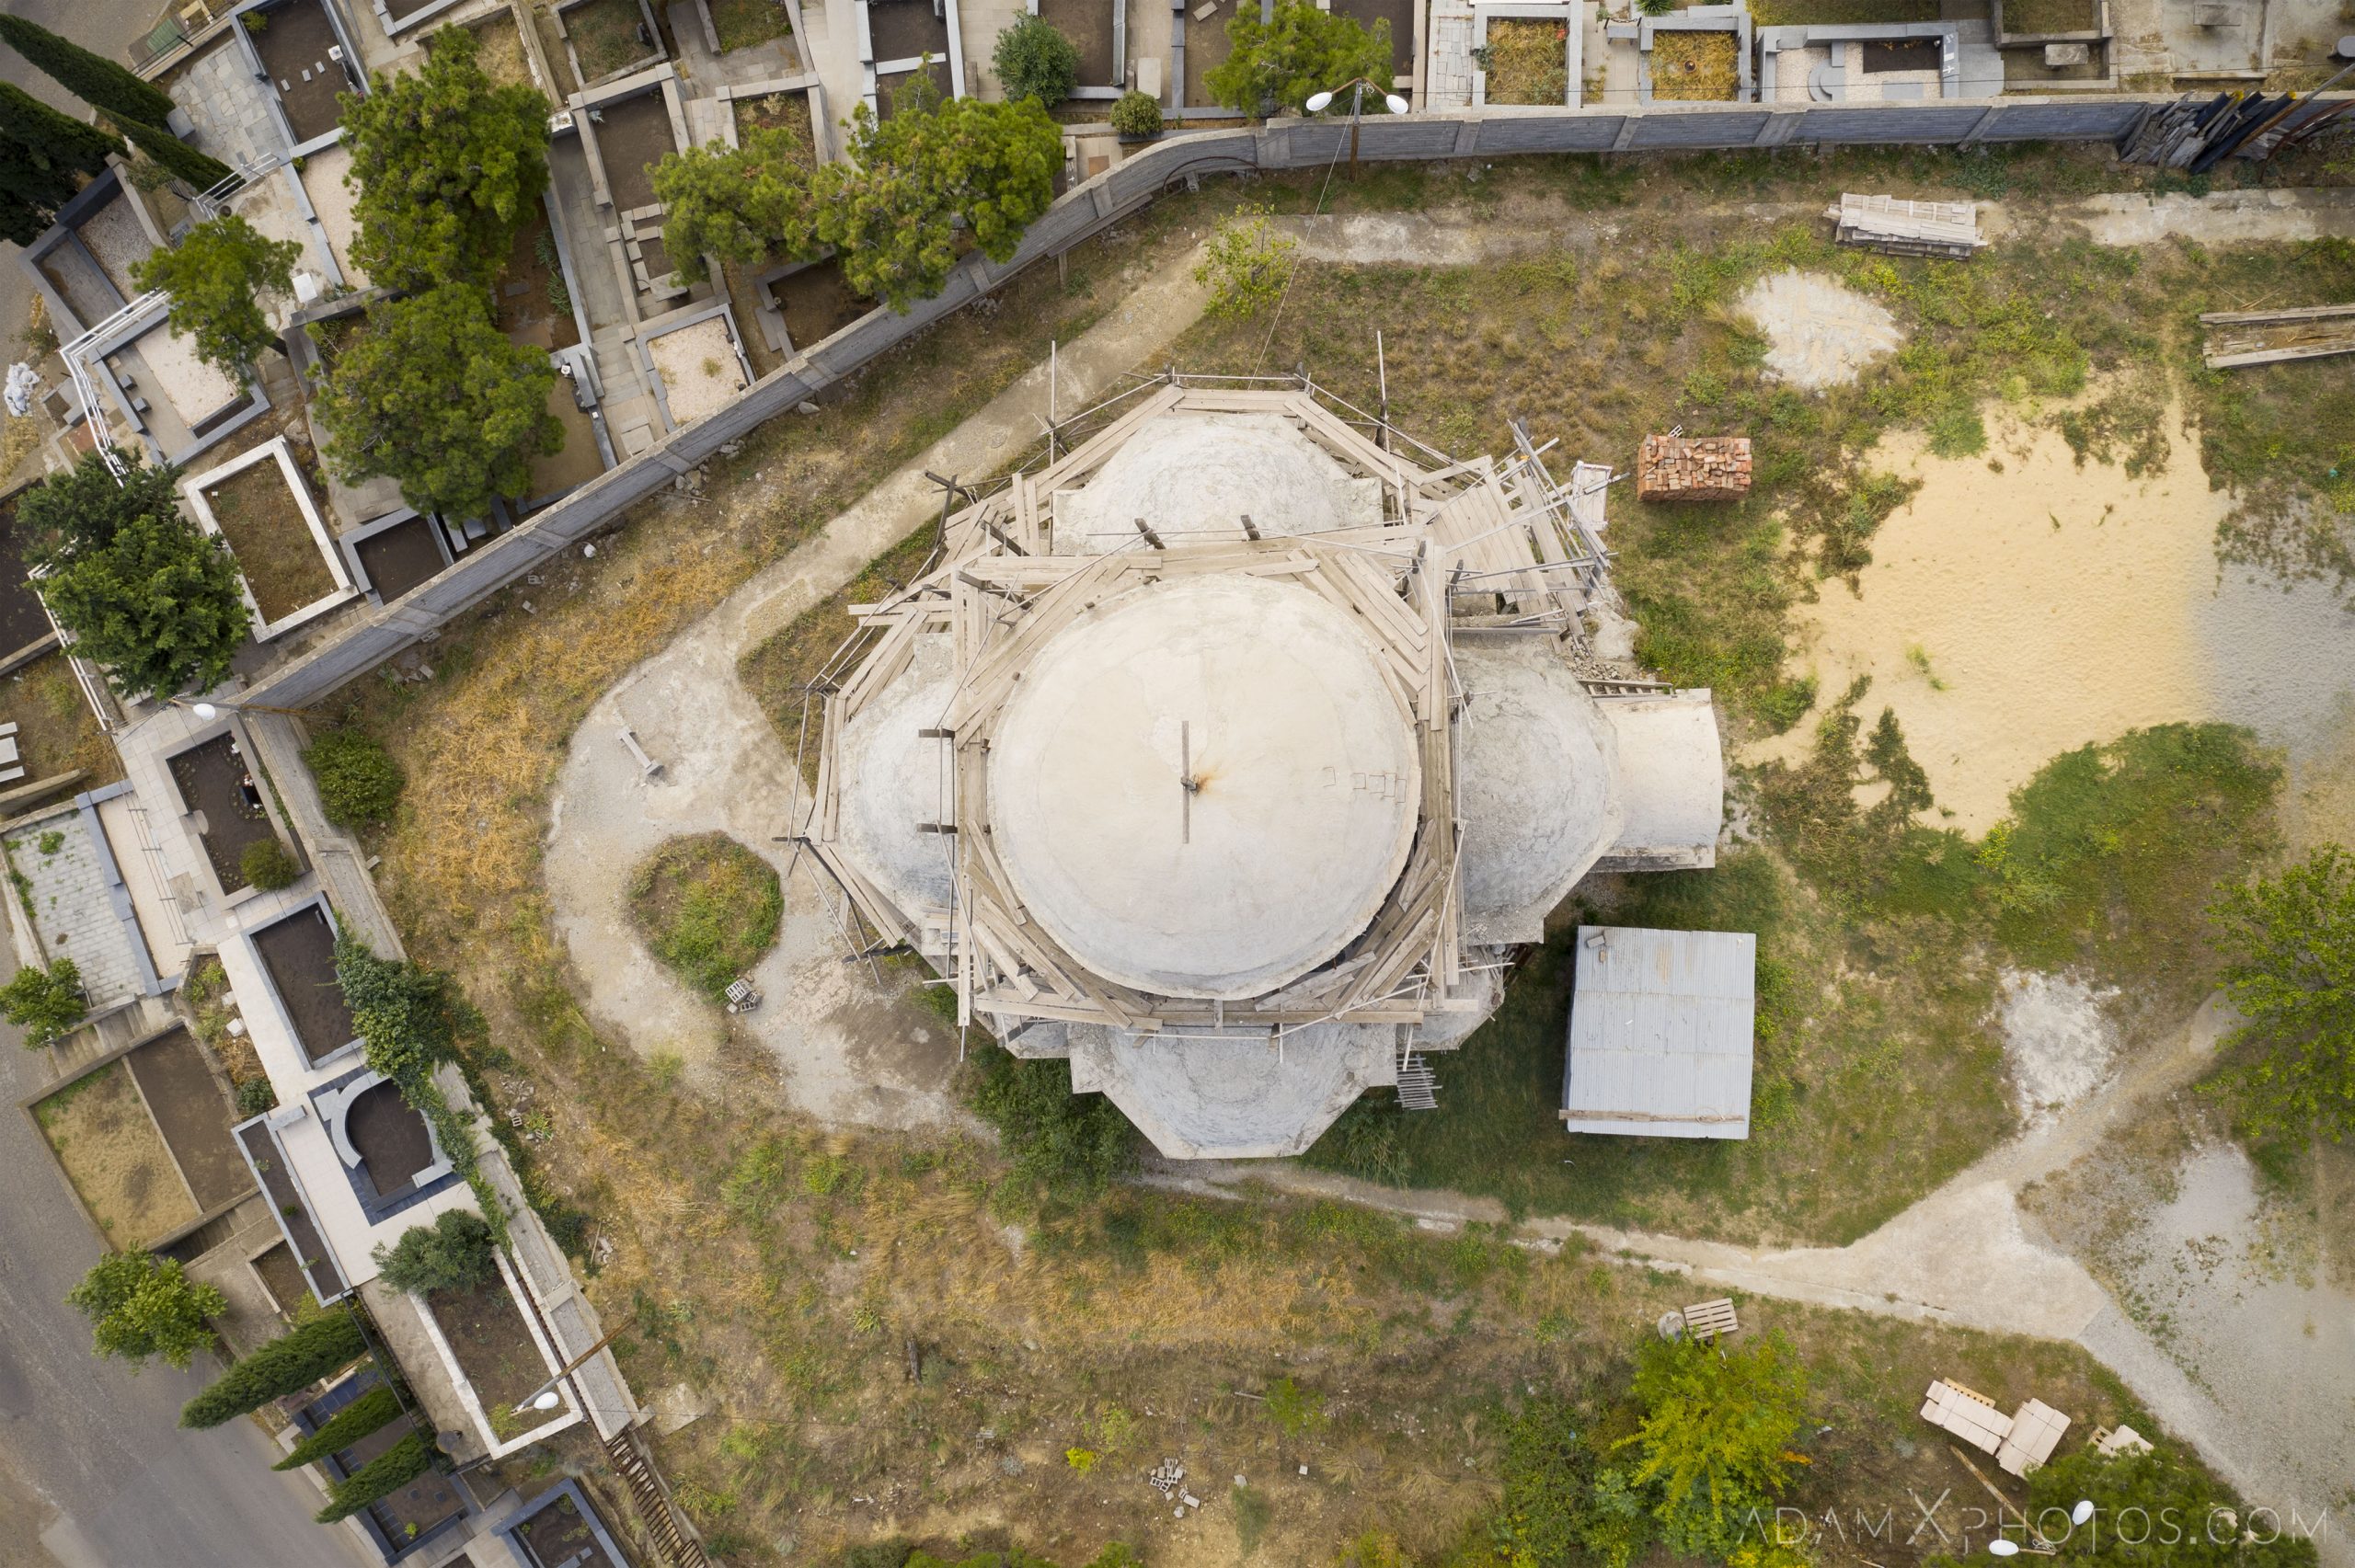 Church Drone Aerial from above Front entrance Soviet Monument to Saint Nino Tbilisi Georgia Soviet era Adam X Urbex Urban Exploration 2018 Abandoned Access History decay ruins lost forgotten derelict location creepy haunting eerie security